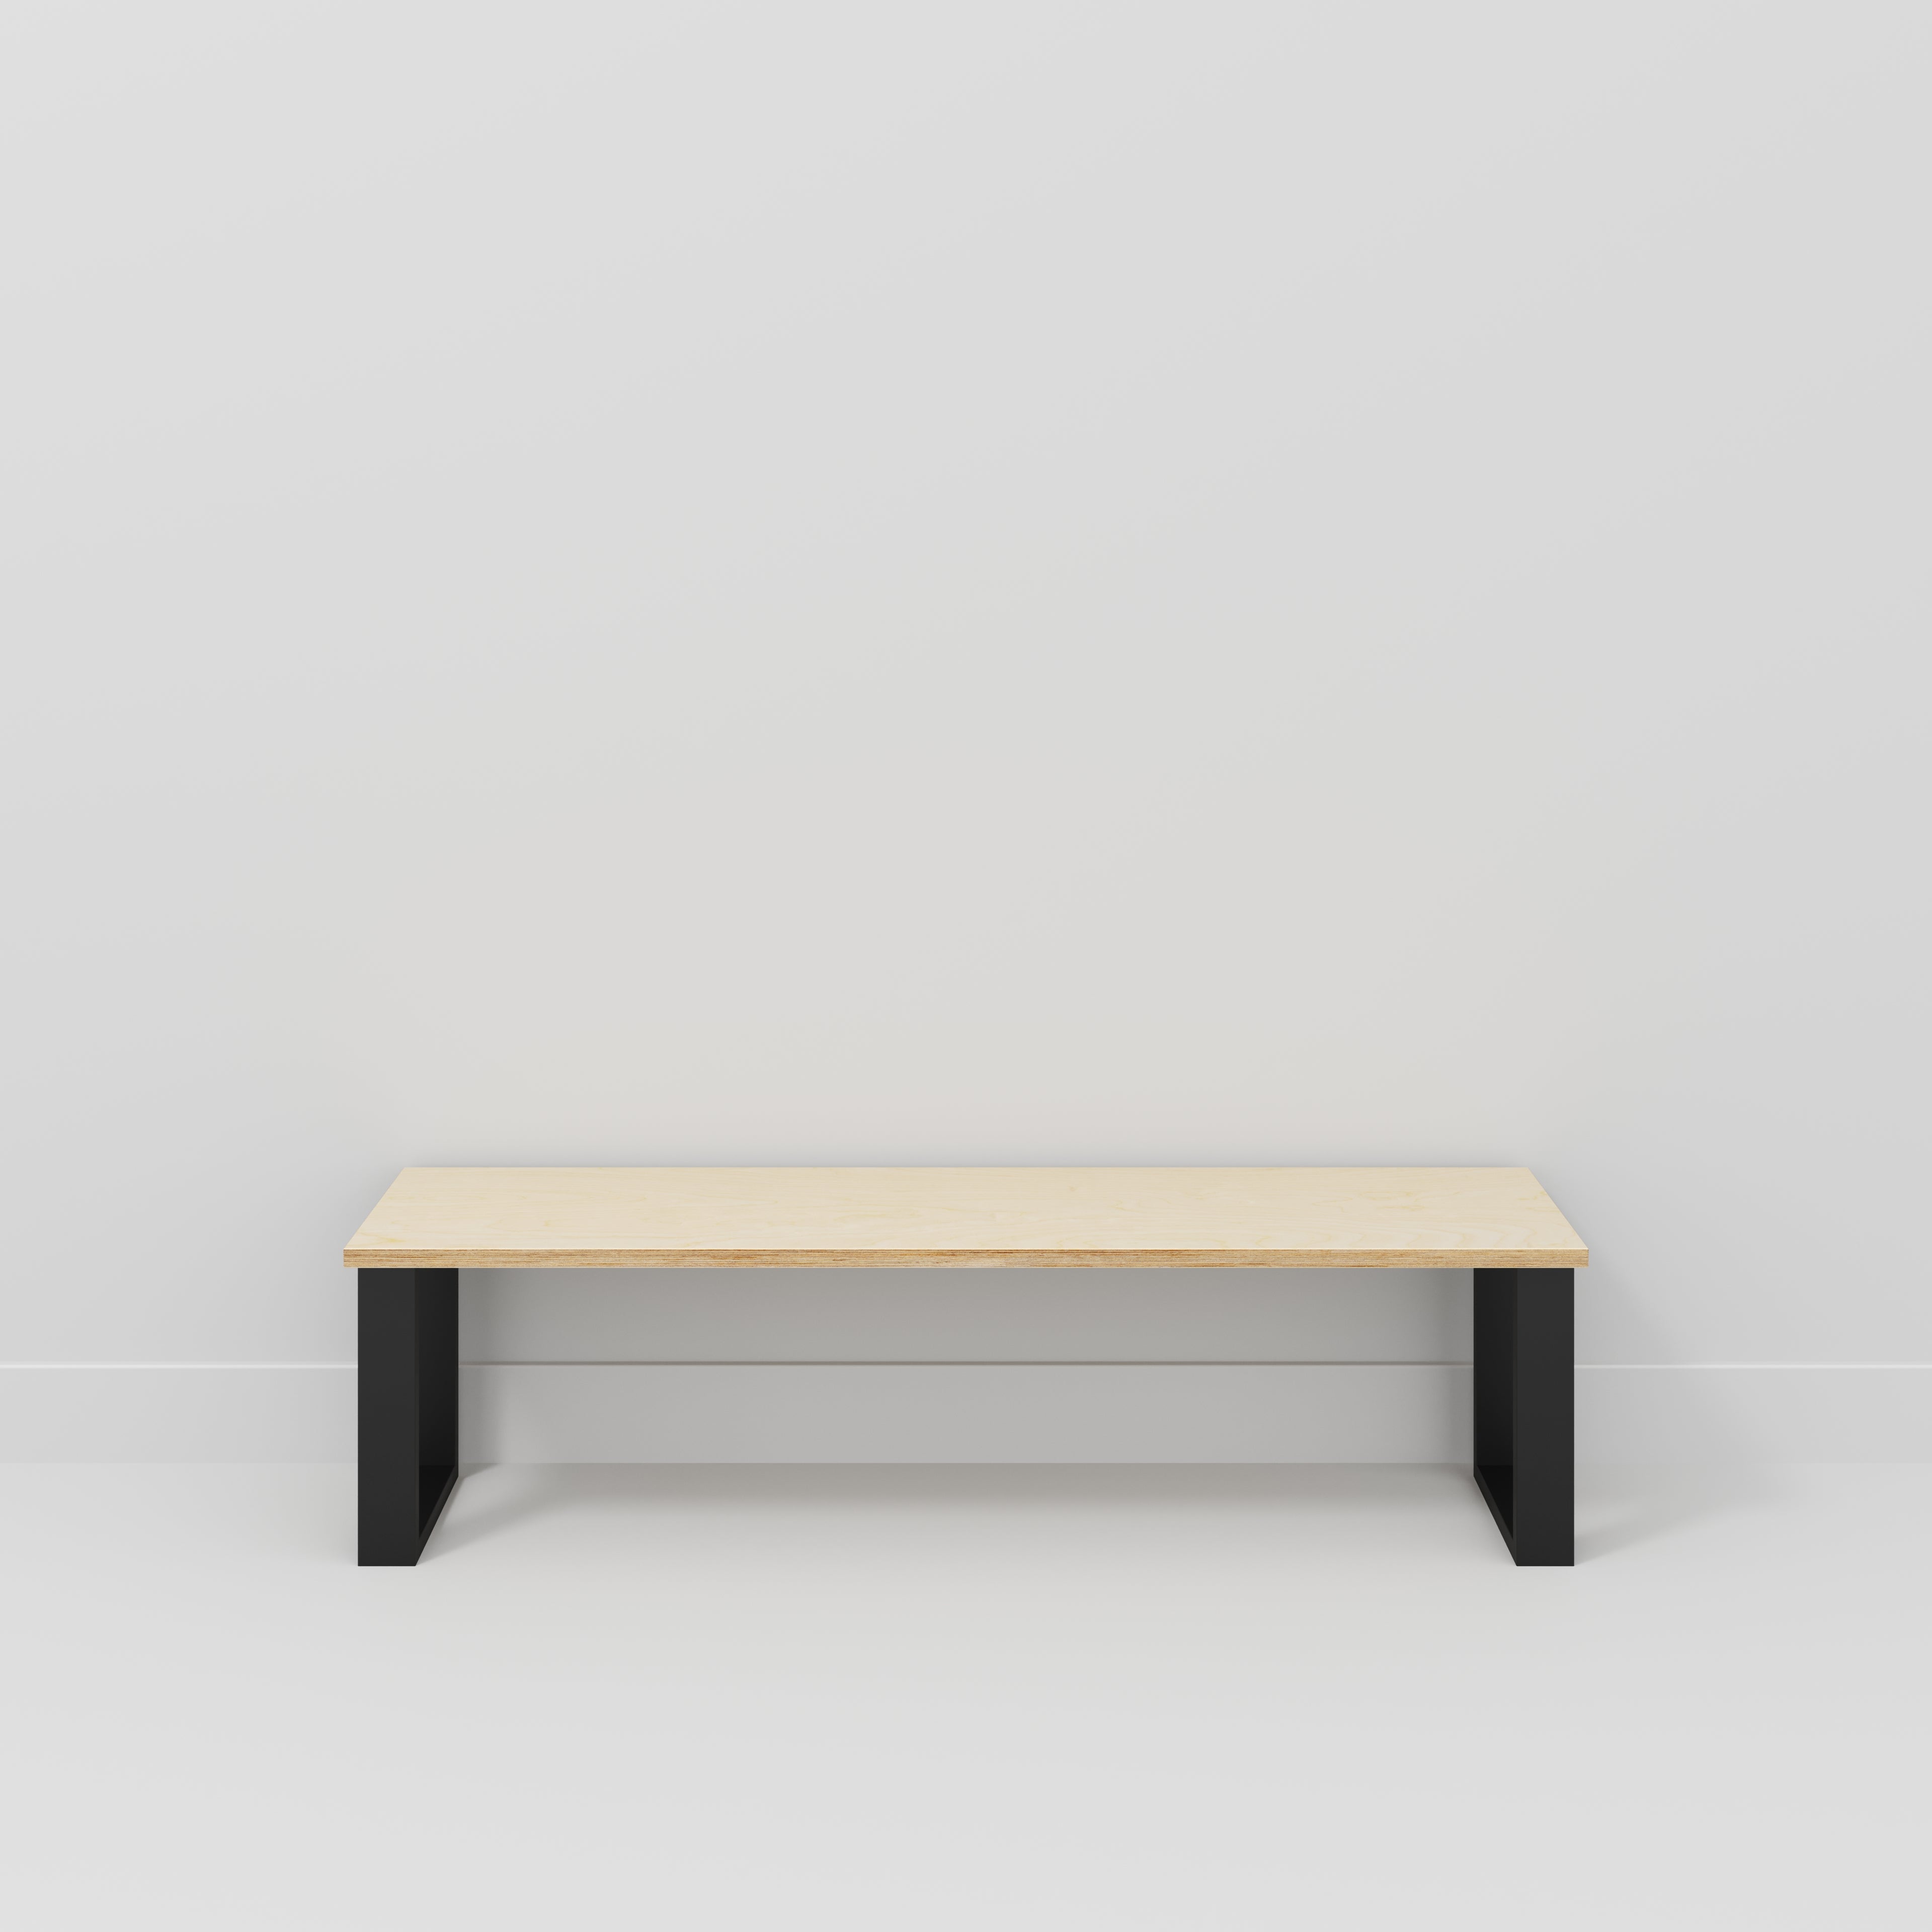 Bench Seat with Black Industrial Legs - Plywood Birch - 1600(w) x 400(d)